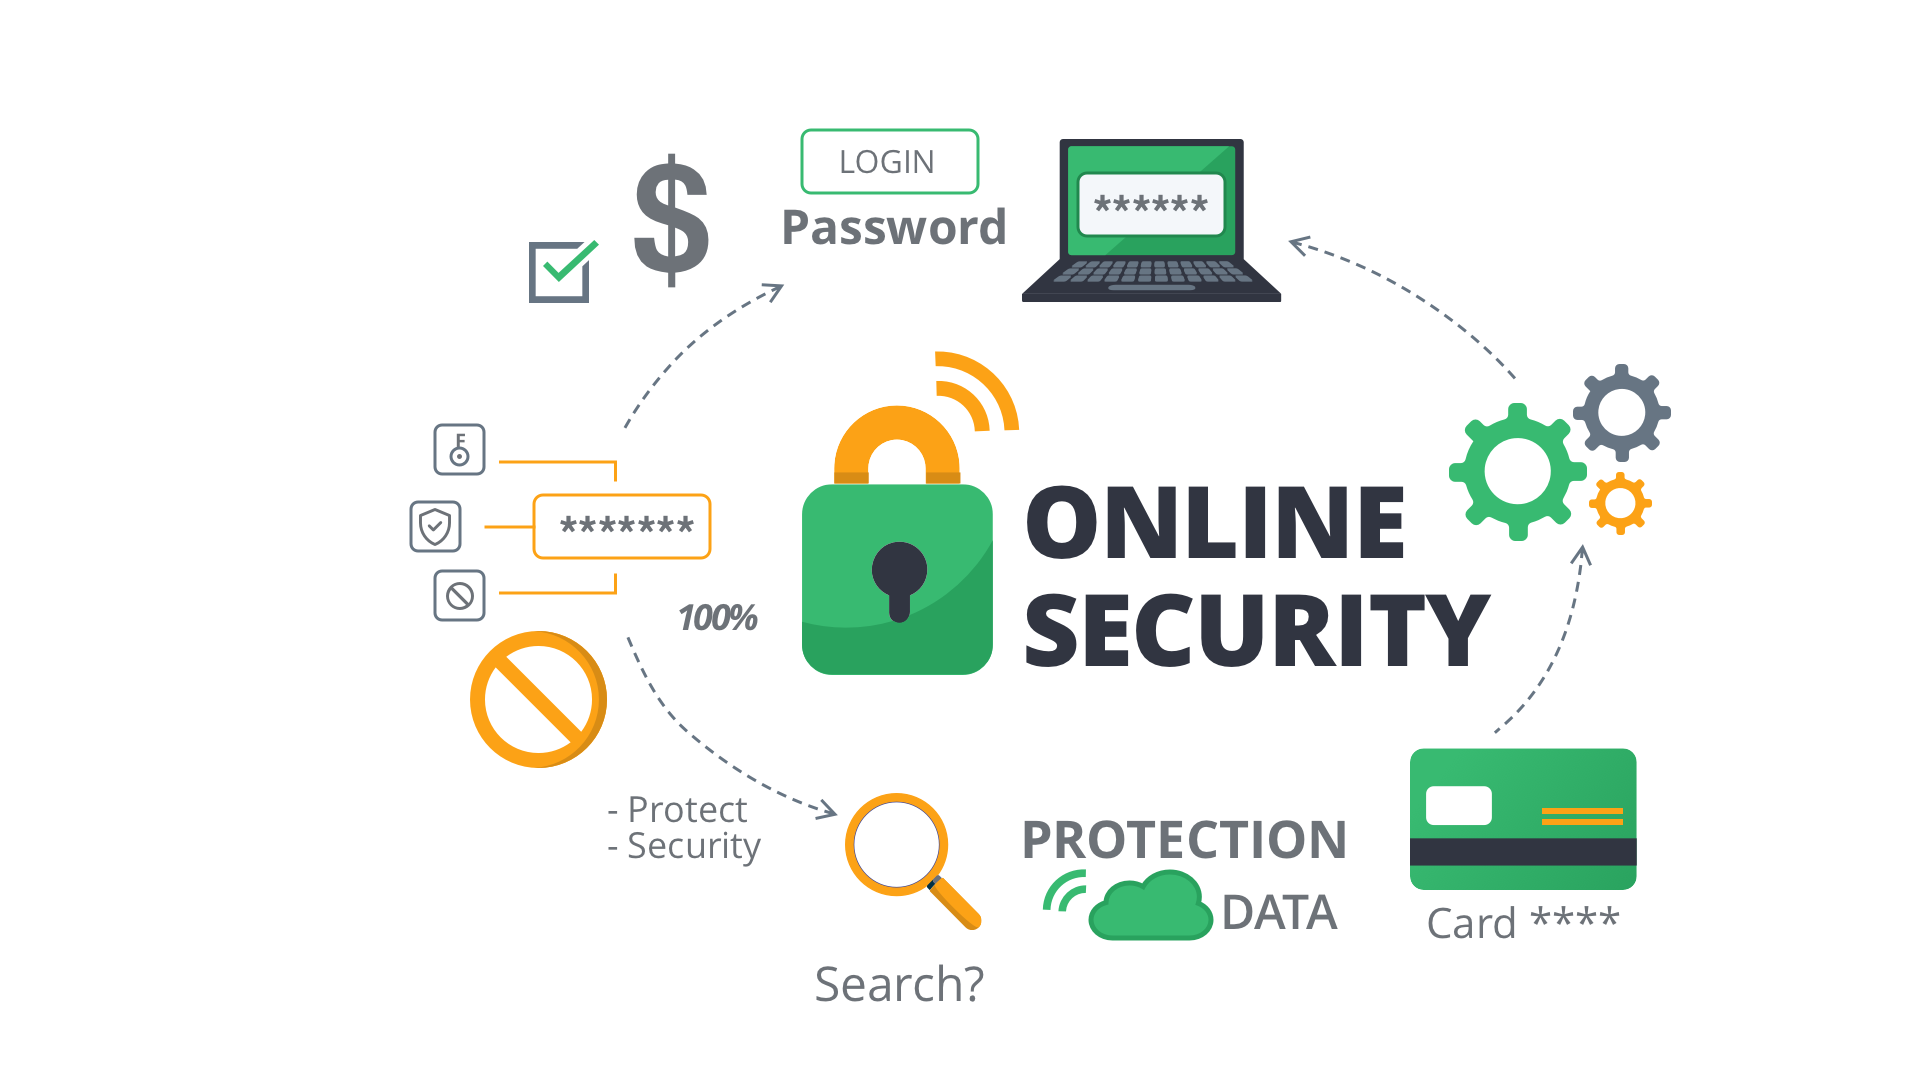 Online Security Tips and Tricks